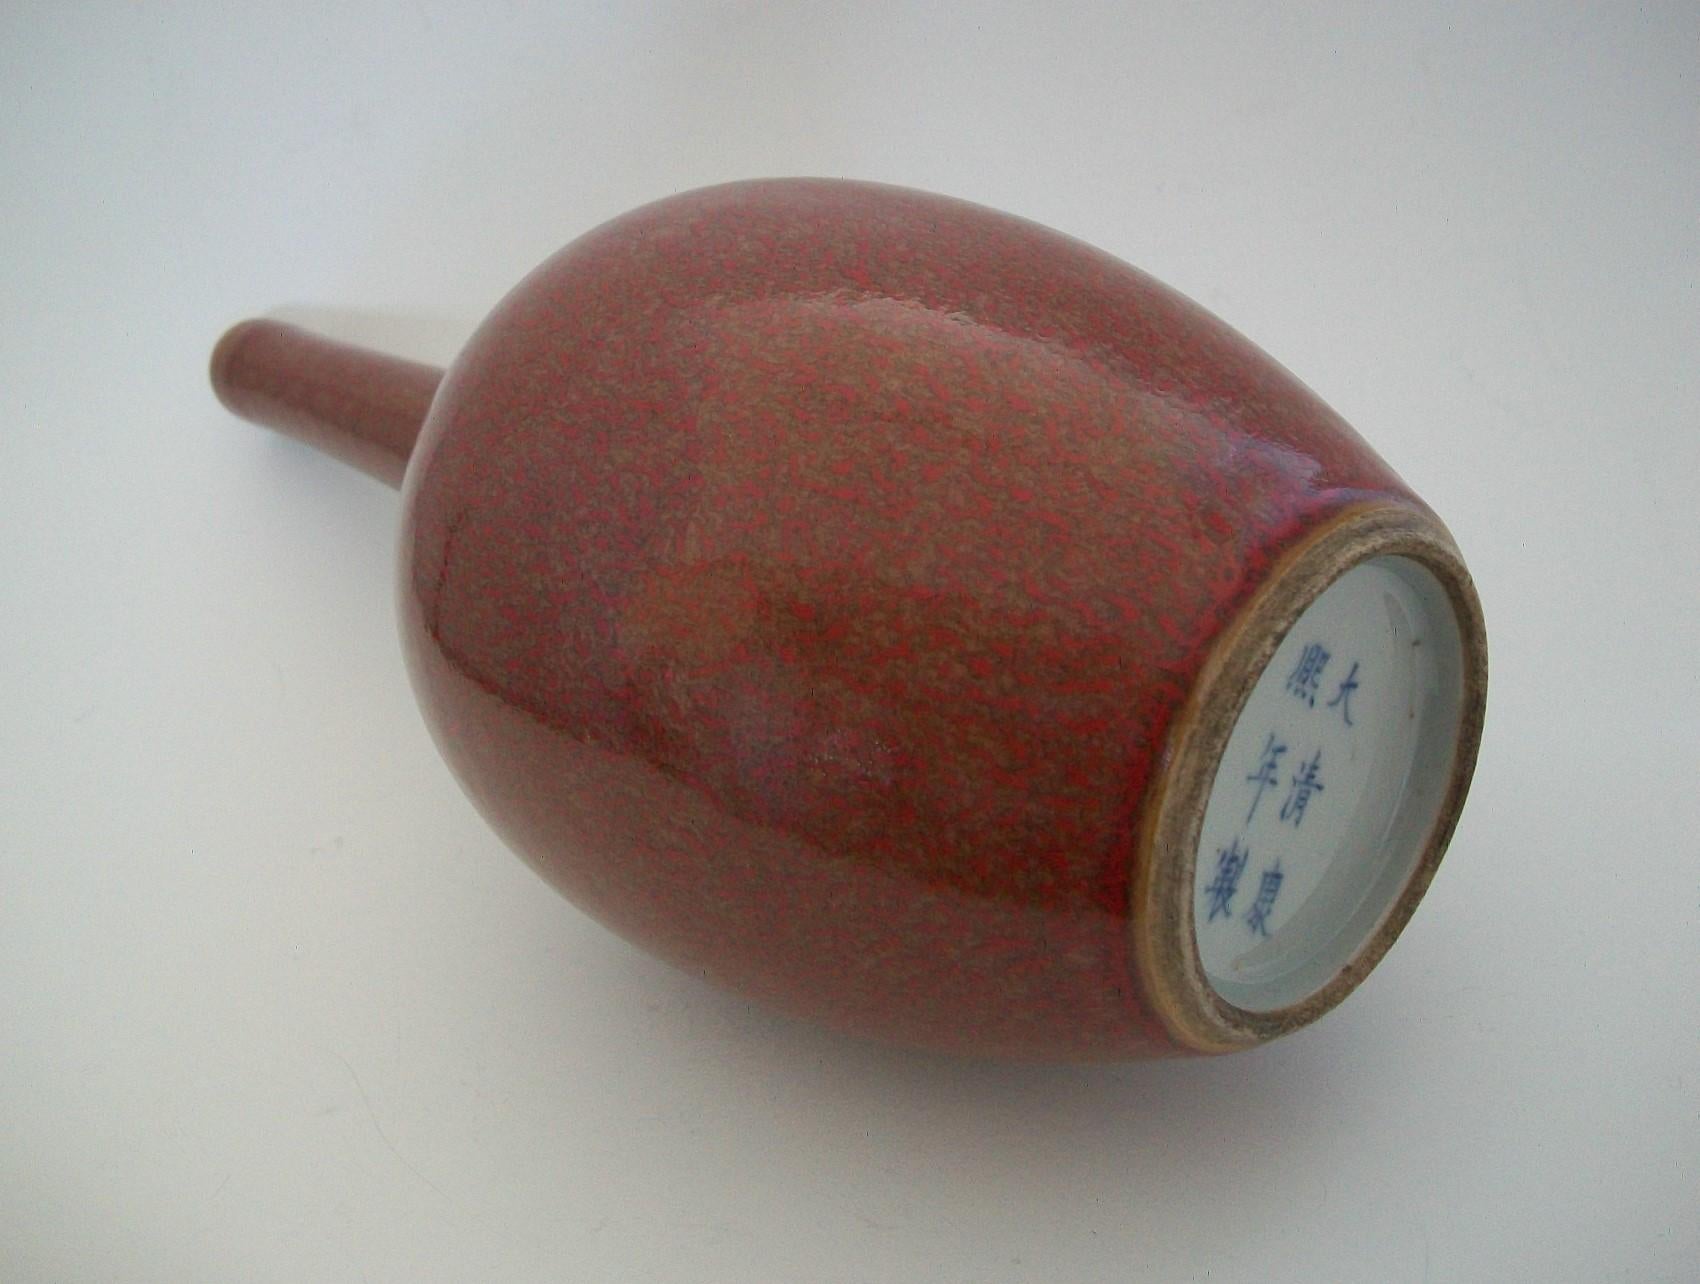 Ceramic Qing Peach-Bloom Bottle Neck Vase, Six Character Mark, China, 19th Century For Sale